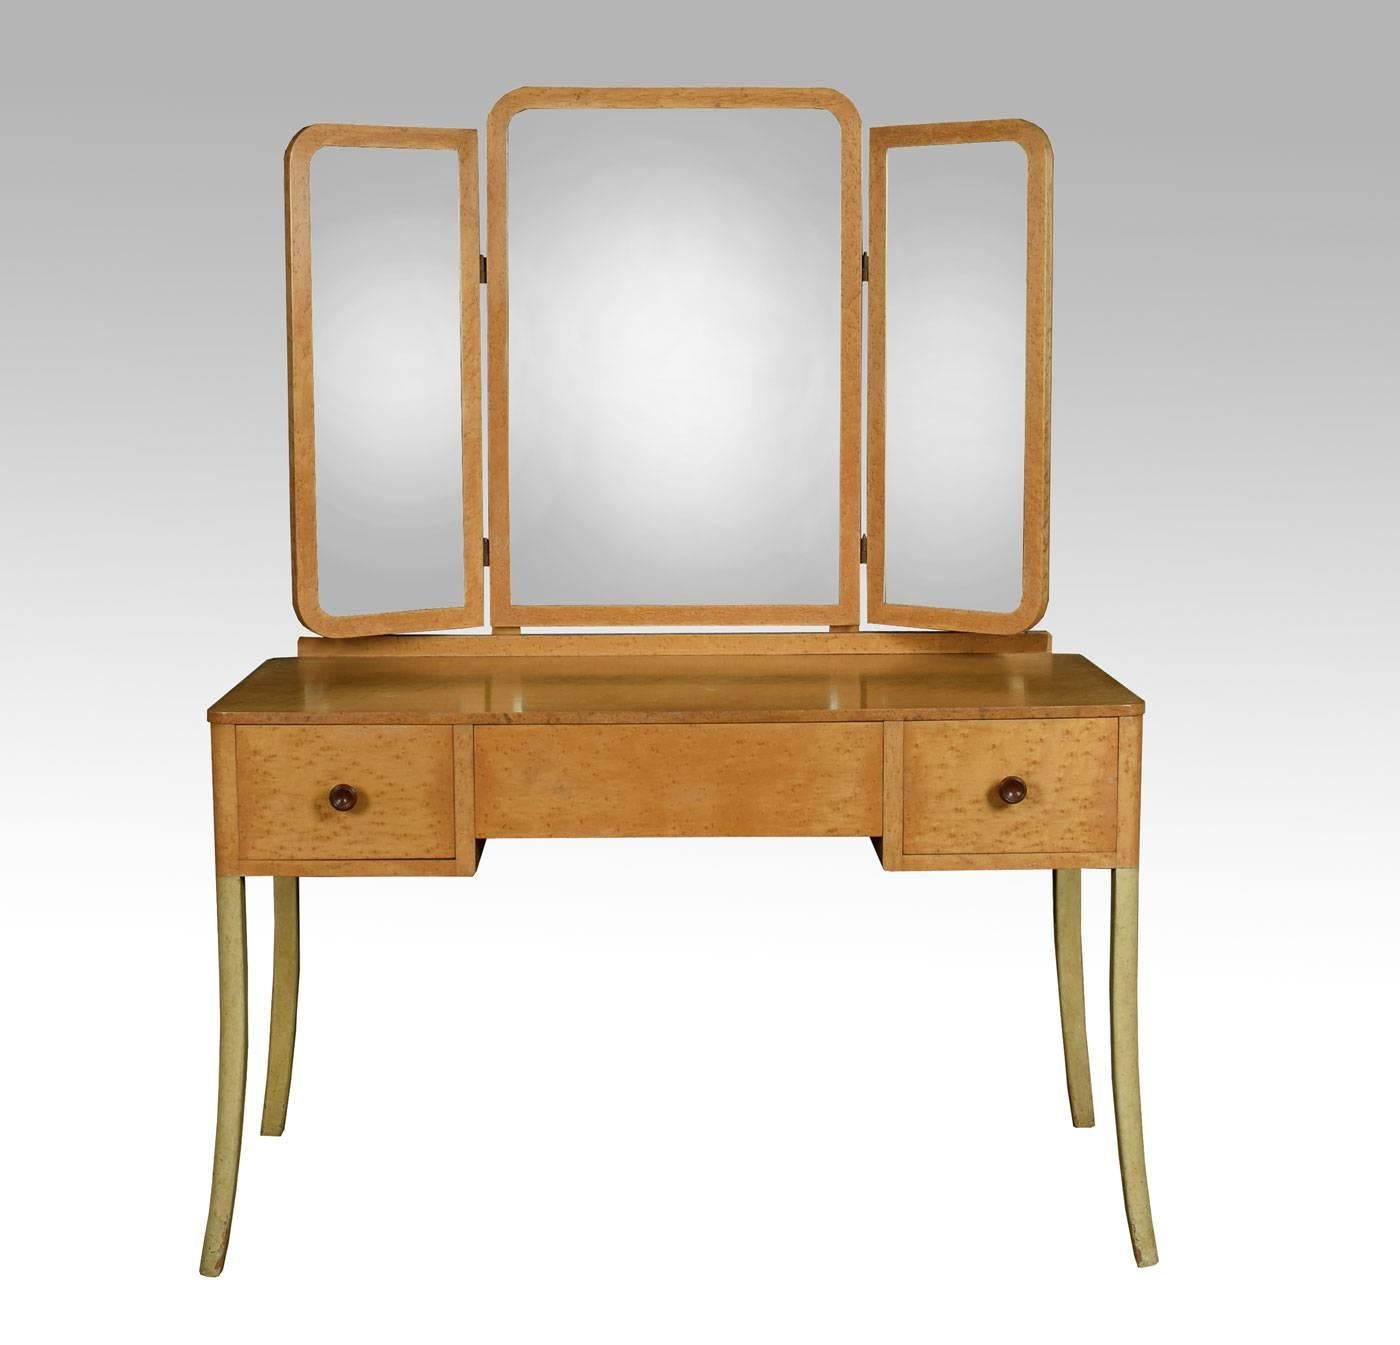 Art Deco bird's-eye maple dressing table and matching stool, the dressing table having mirrored superstructure with large central mirror with smaller mirror to either side. The rectangular removable glazed top with rounded corners above three freeze